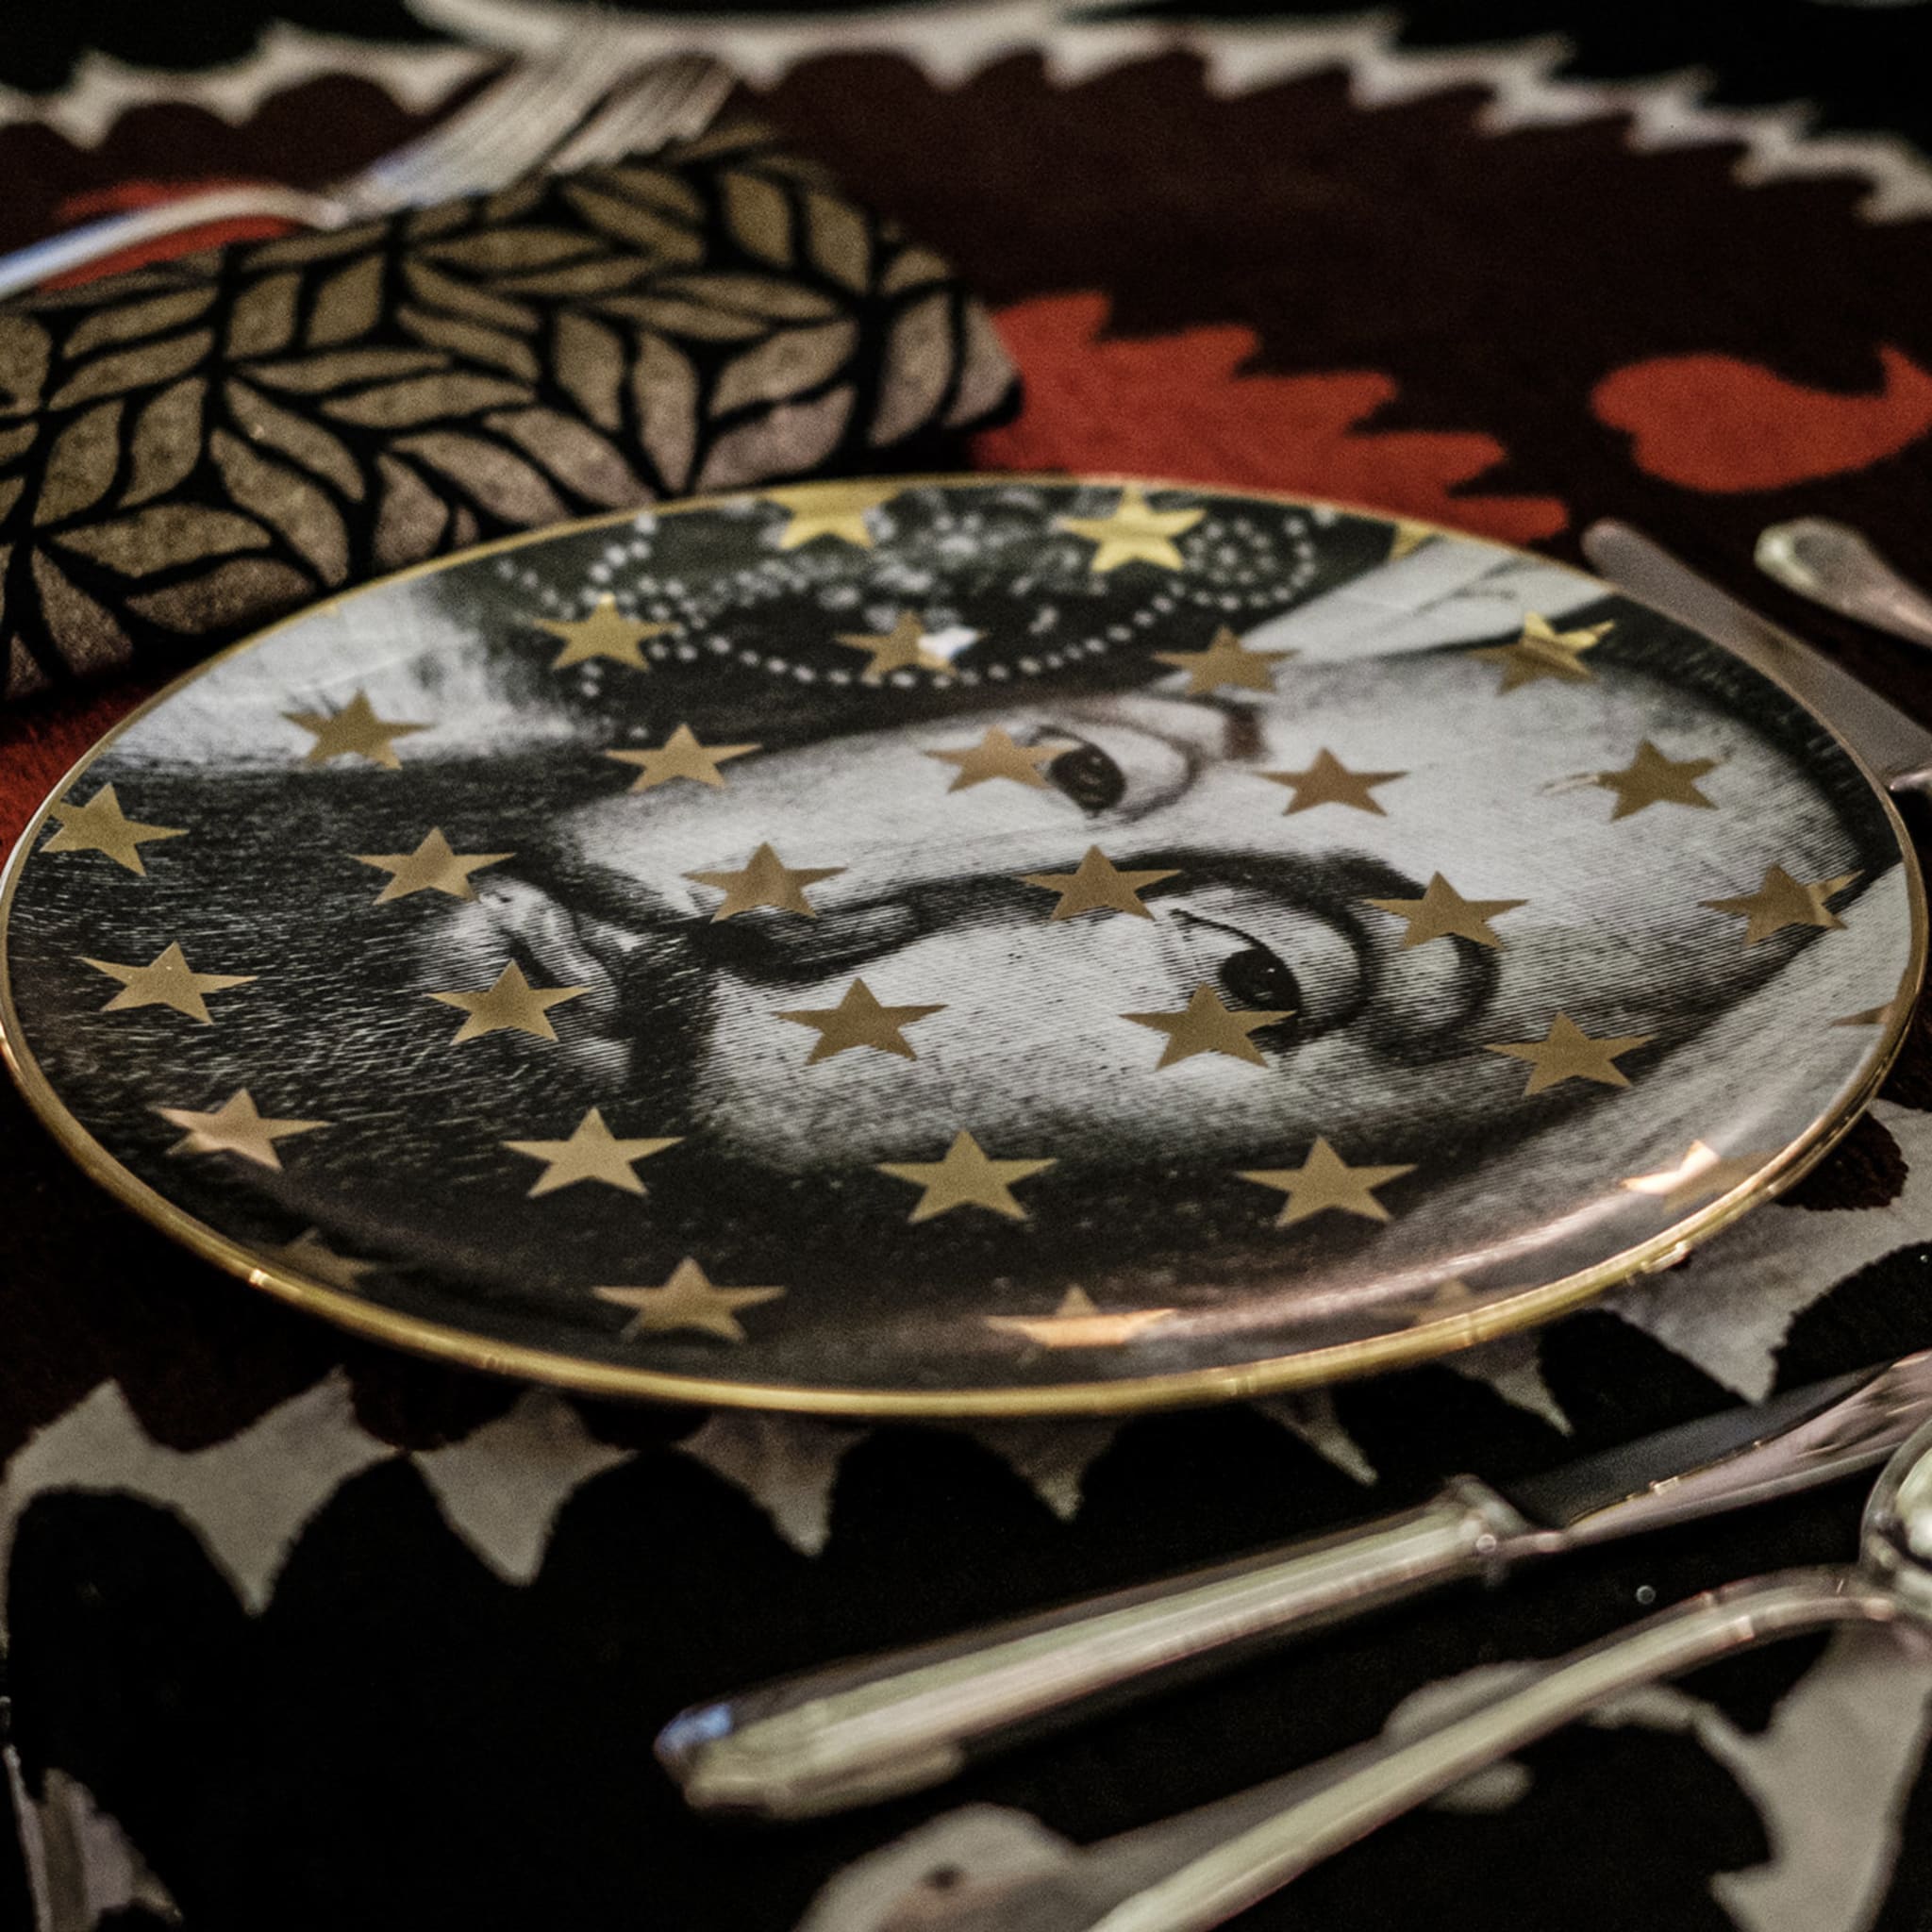 The Sultan Limited Gold Edition Dinner Plate N.3 - Alternative view 1